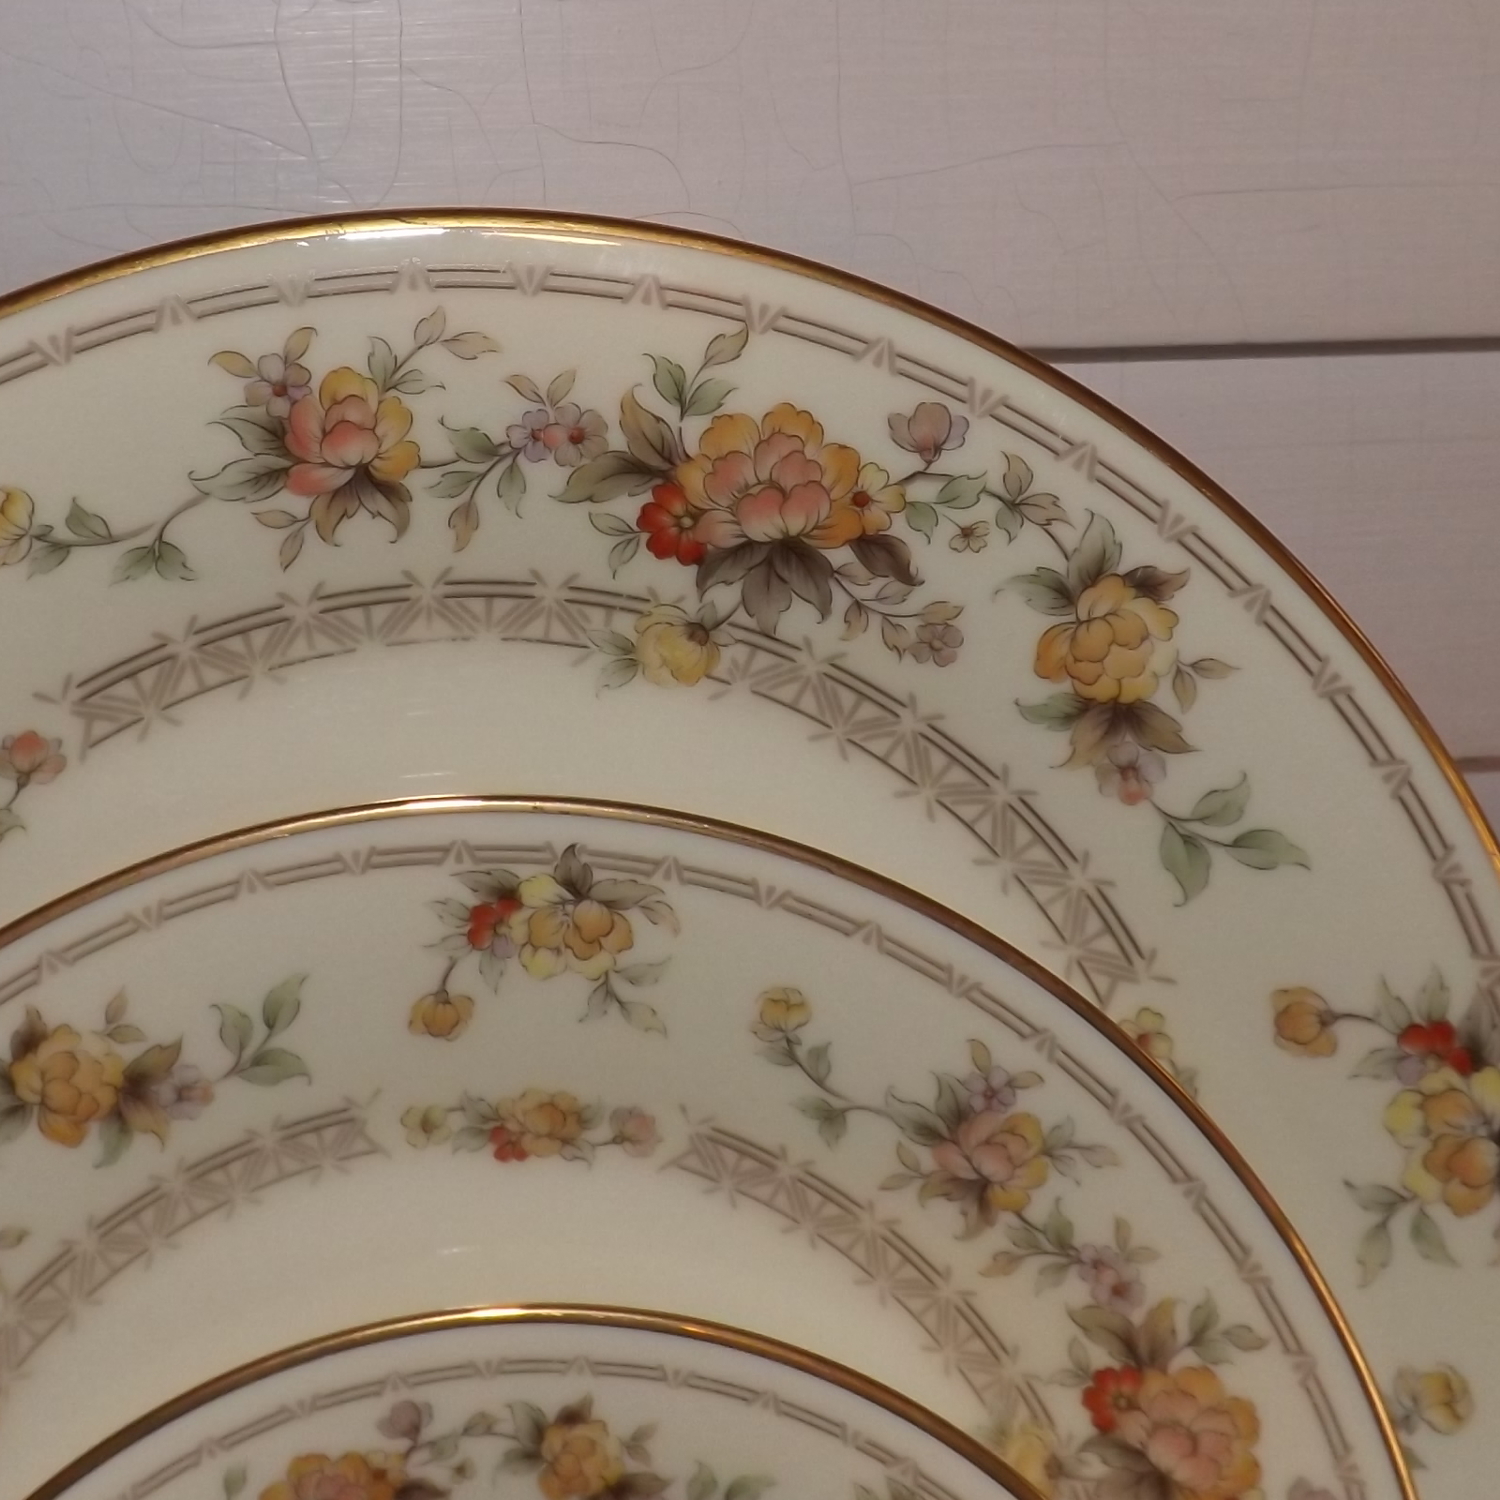 Noritake Westport Yellow 3 Plate Set: Dinner, Salad, and Bread/Butter Fine China - $24.99